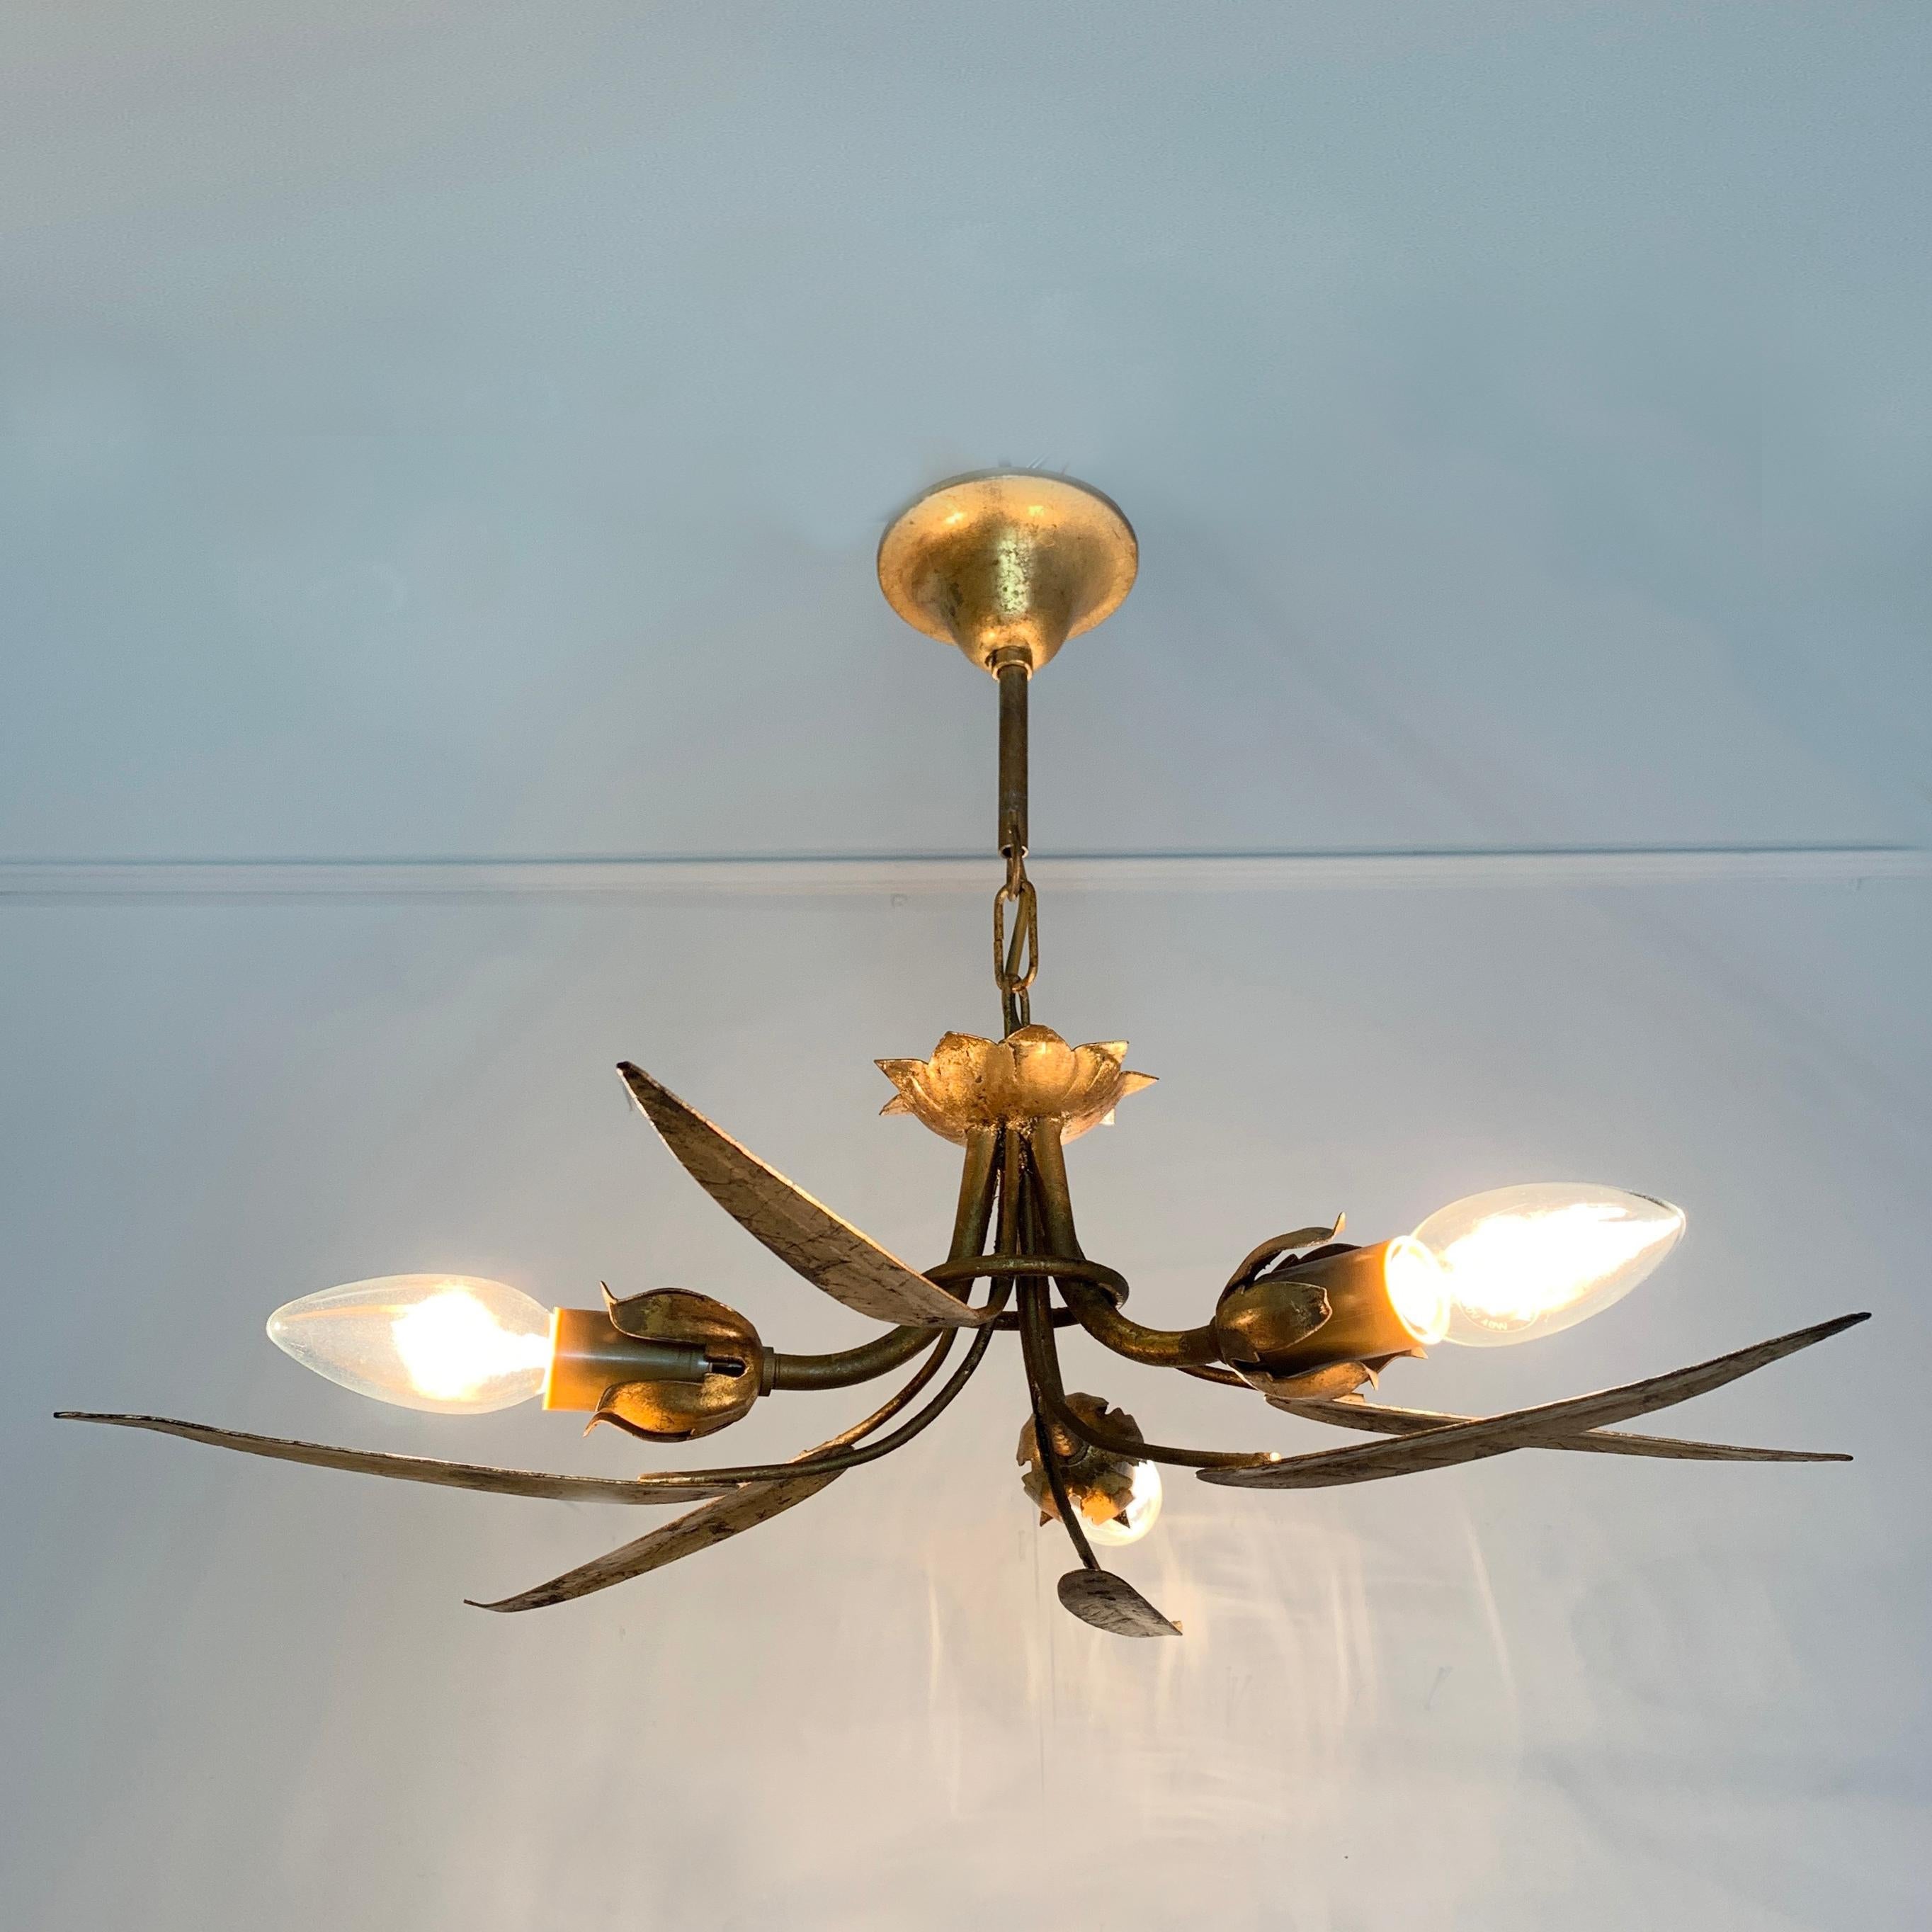 'Ferro Art' gilt leaf ceiling light
Spain, 1950s-1960s
Gilt metal leaves forning a pretty star shaped pendant light
The leaves are gold leaf finish
Behind the leaves are Classic Ferro buds holding 3 lampholders, E14 bulbs
There is a small chain